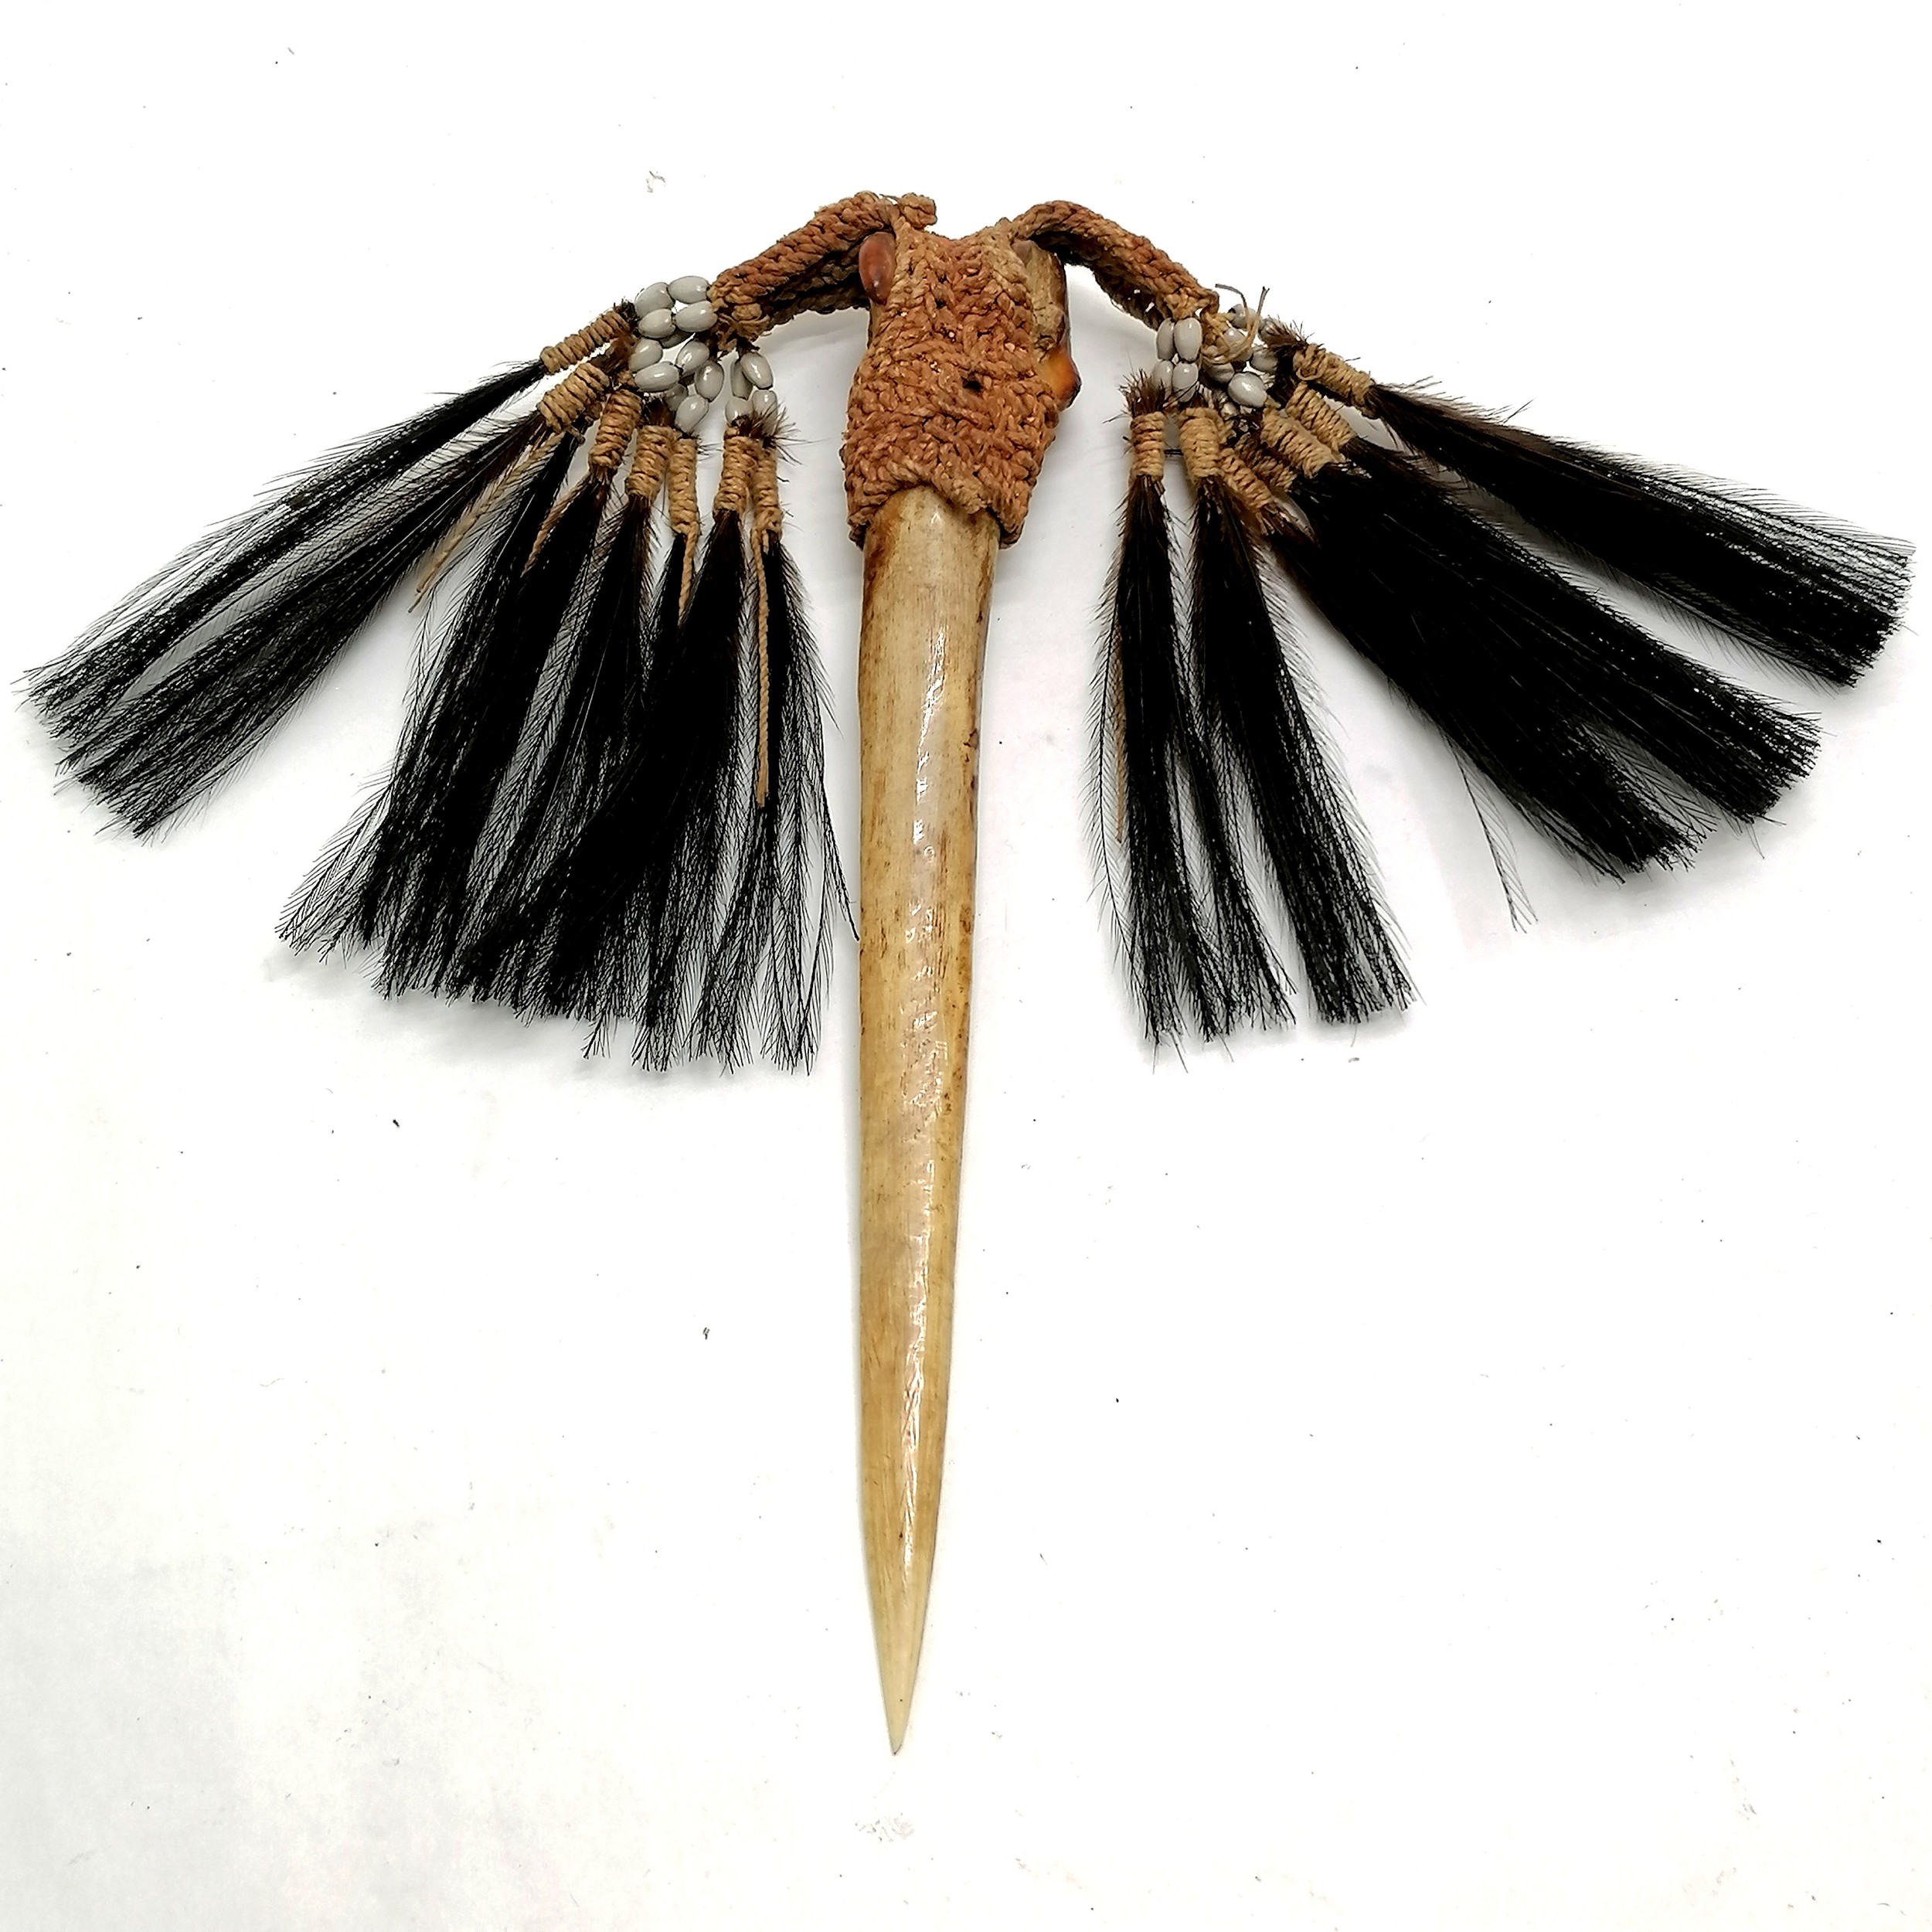 Antique New Guinea Cassowary bone ceremonial dagger with string, bead and feather detail 31cm long. - Image 2 of 3